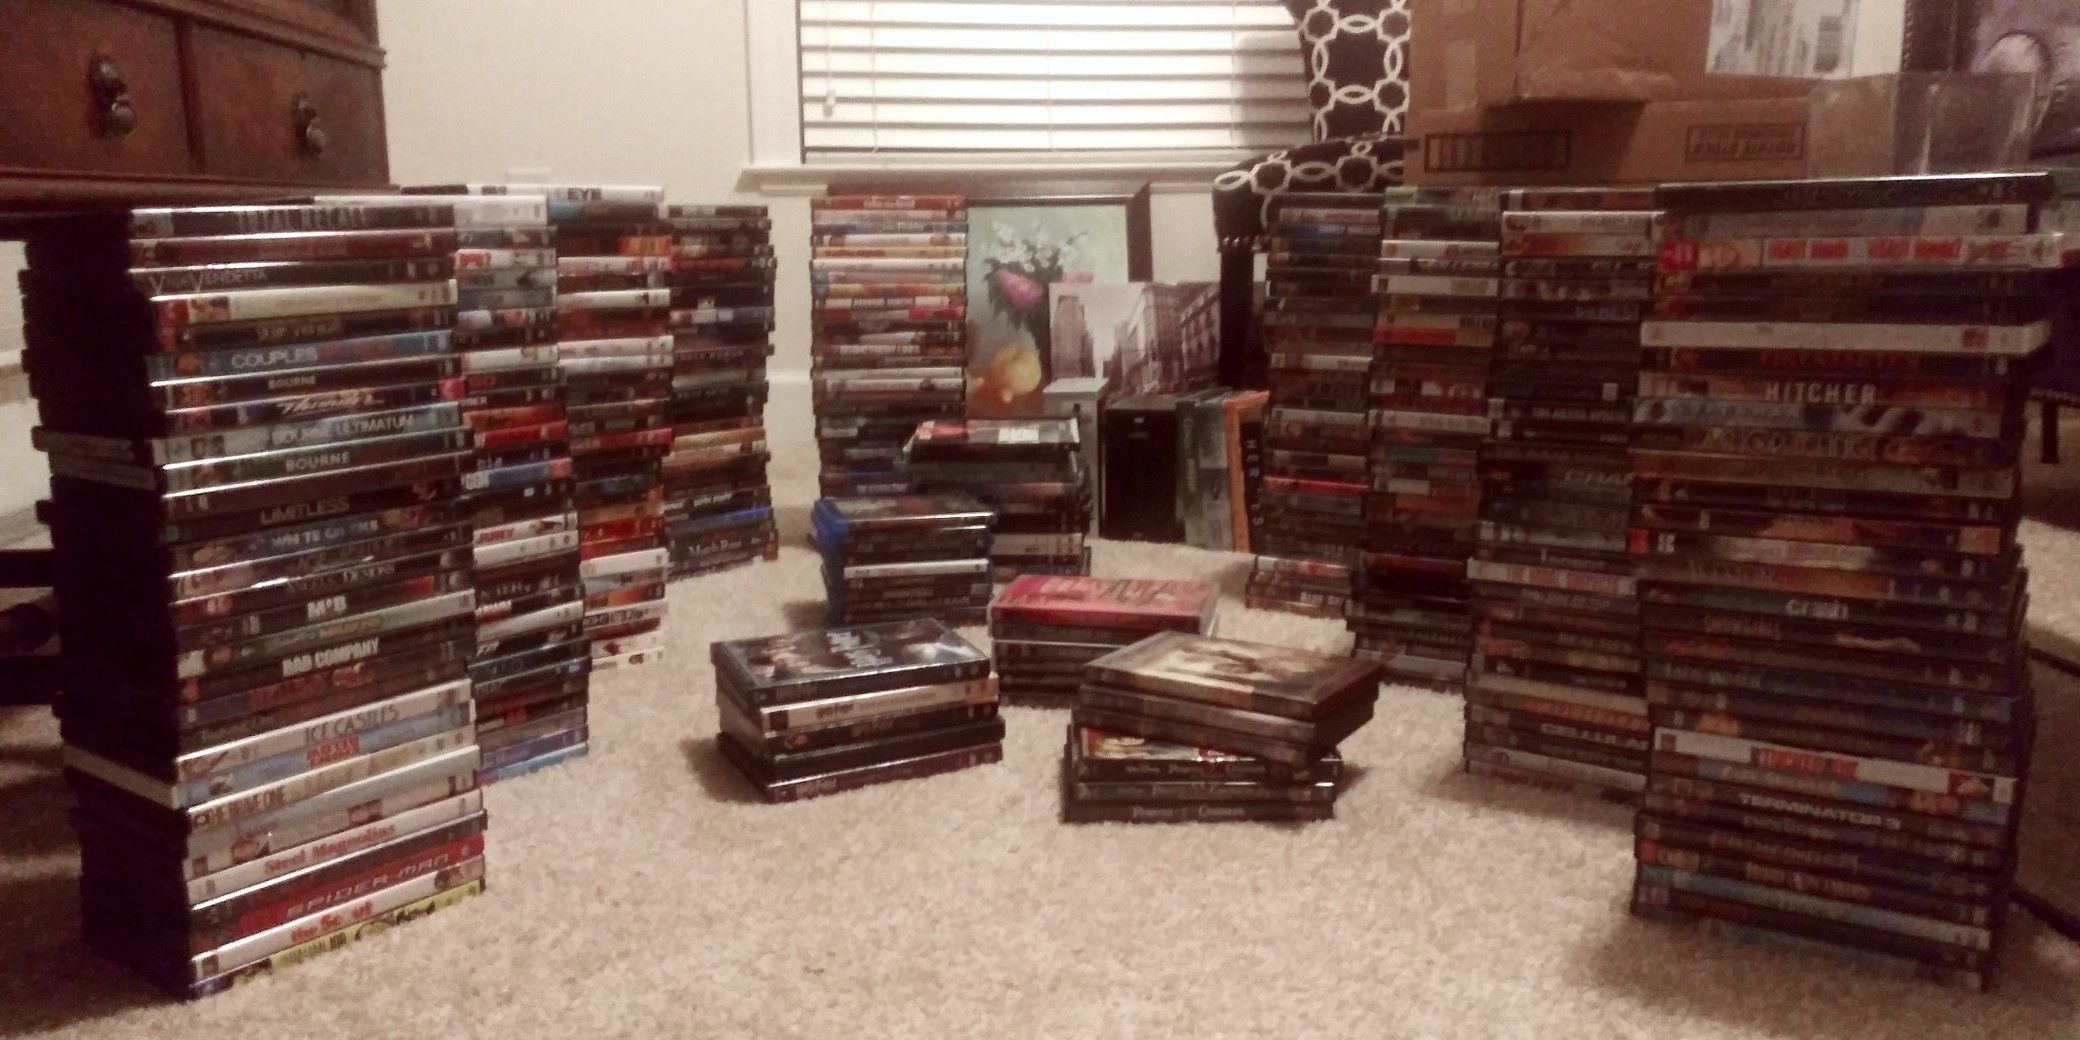 DVDs/Blu Rays-For Sale Complete Lot